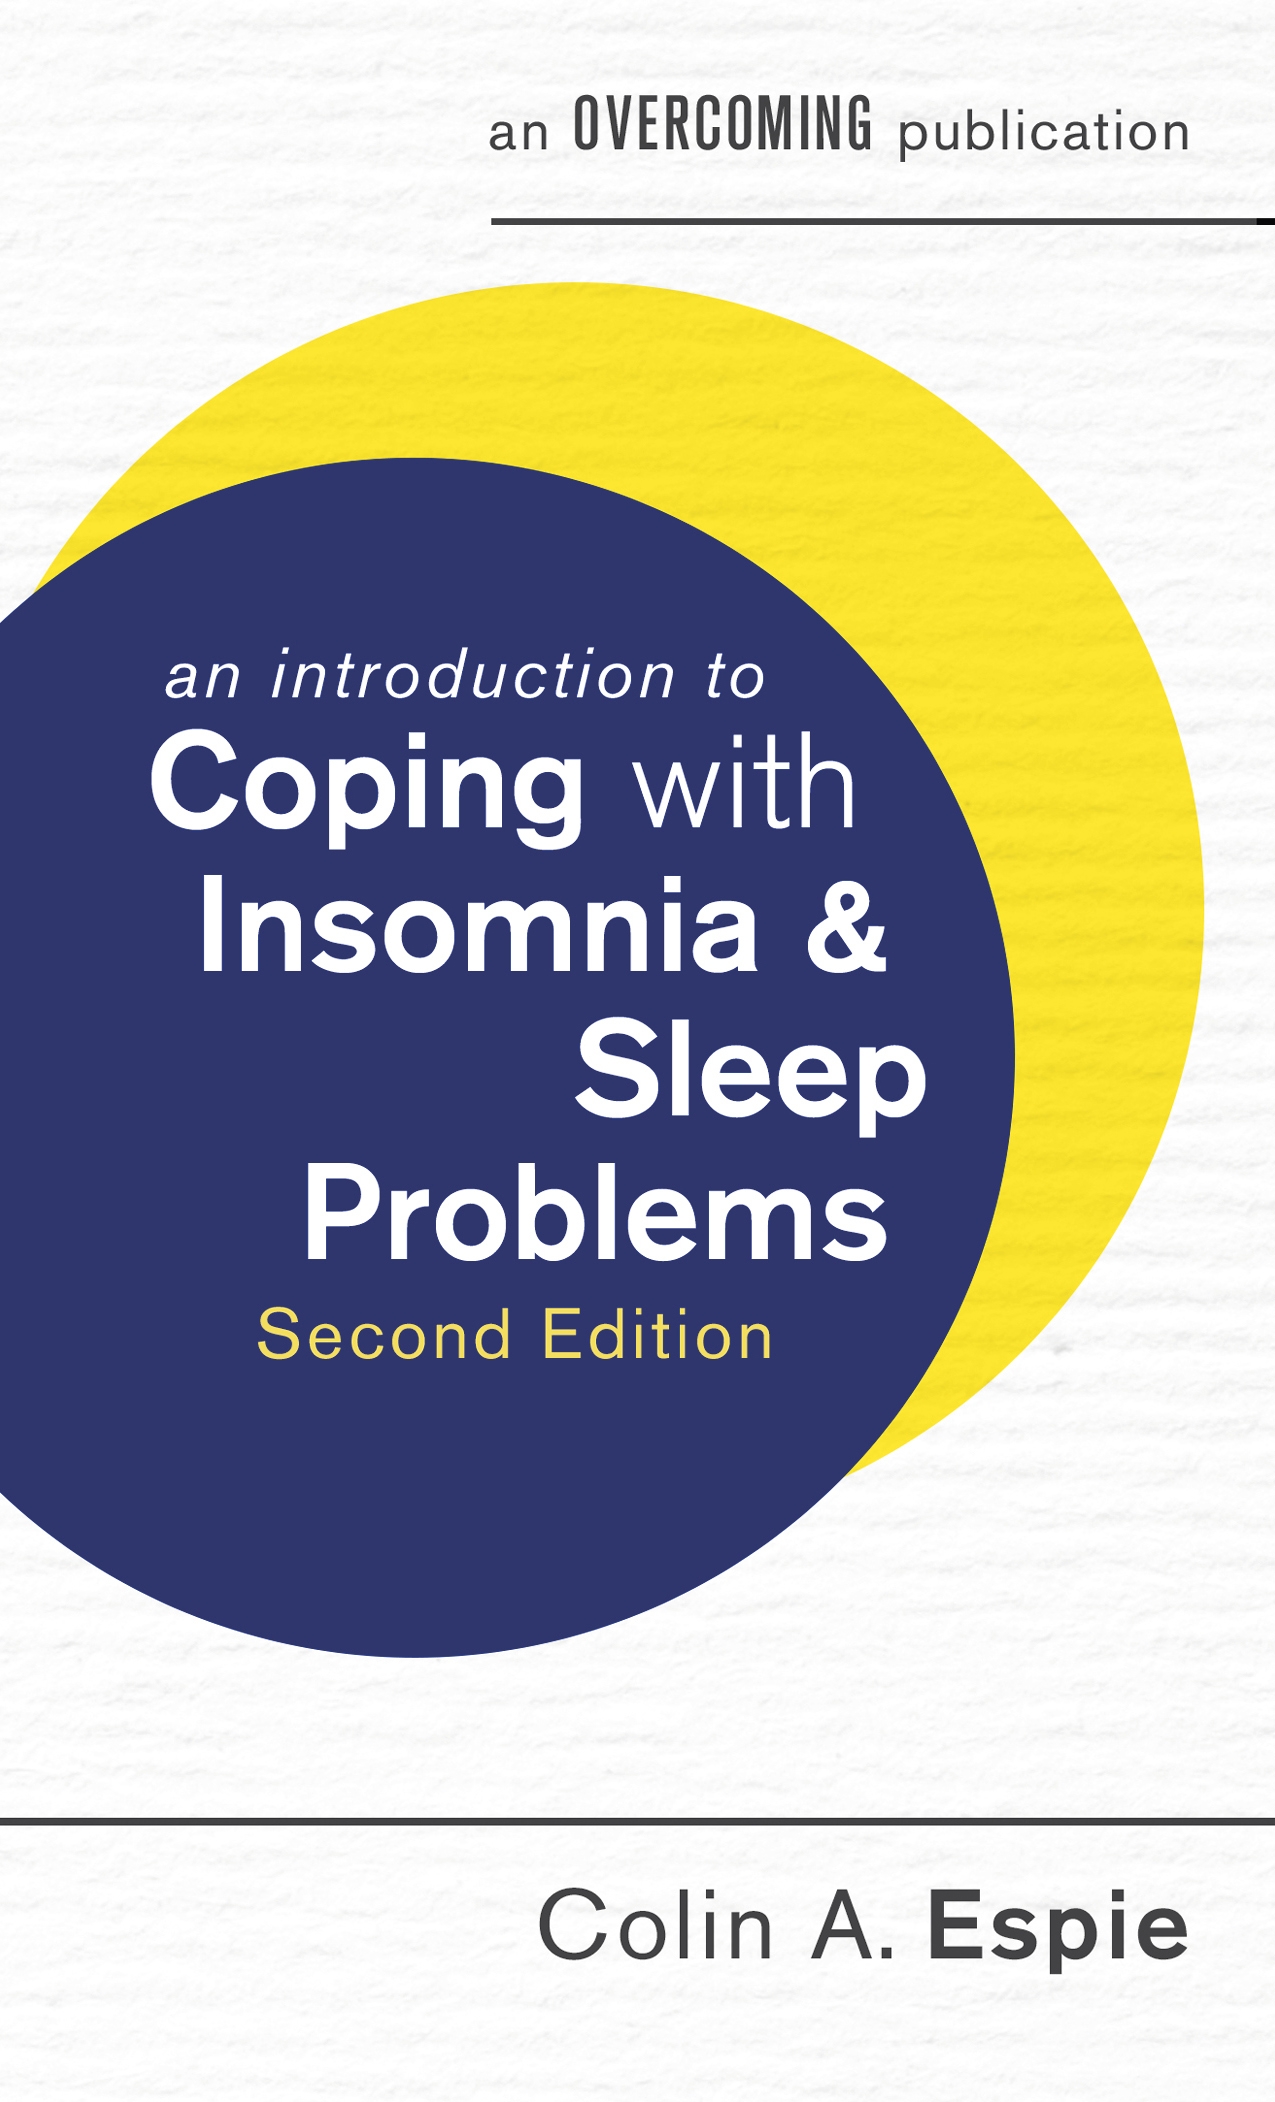 An Introduction To Coping With Insomnia And Sleep Problems 2nd Edition - 